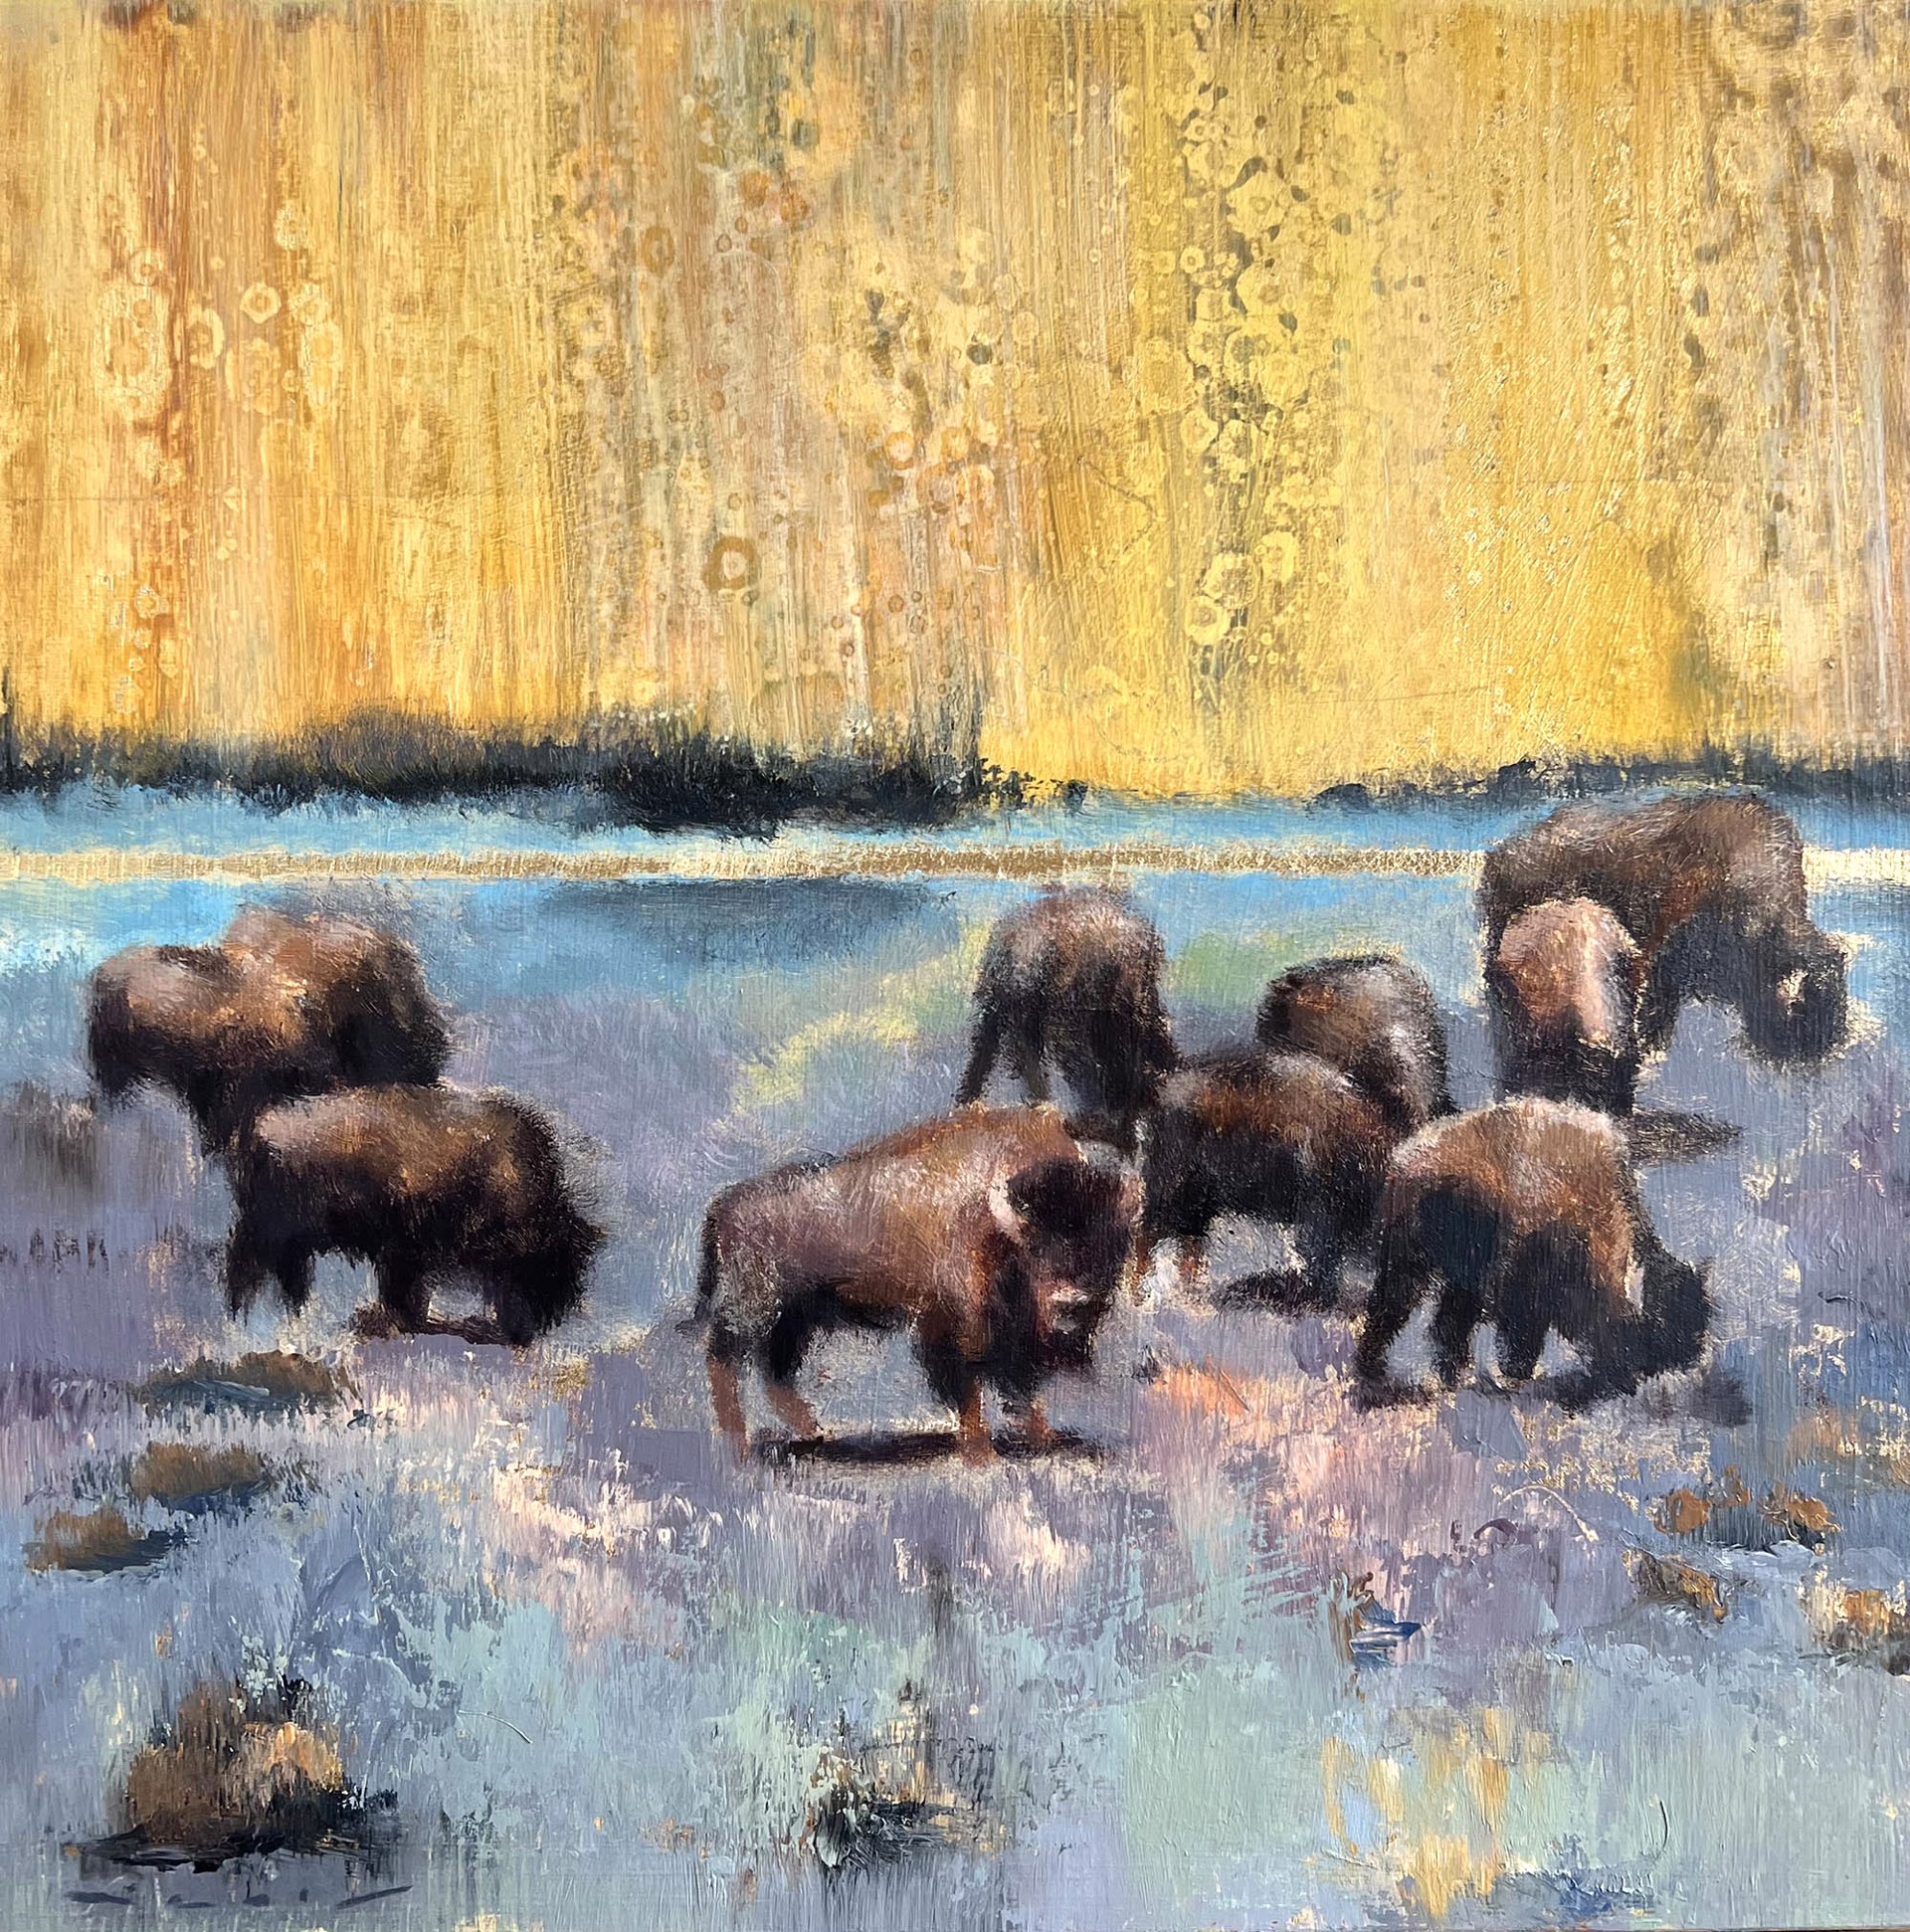 Original Mixed Media Painting By Nealy Riley Featuring A Herd Of Bison